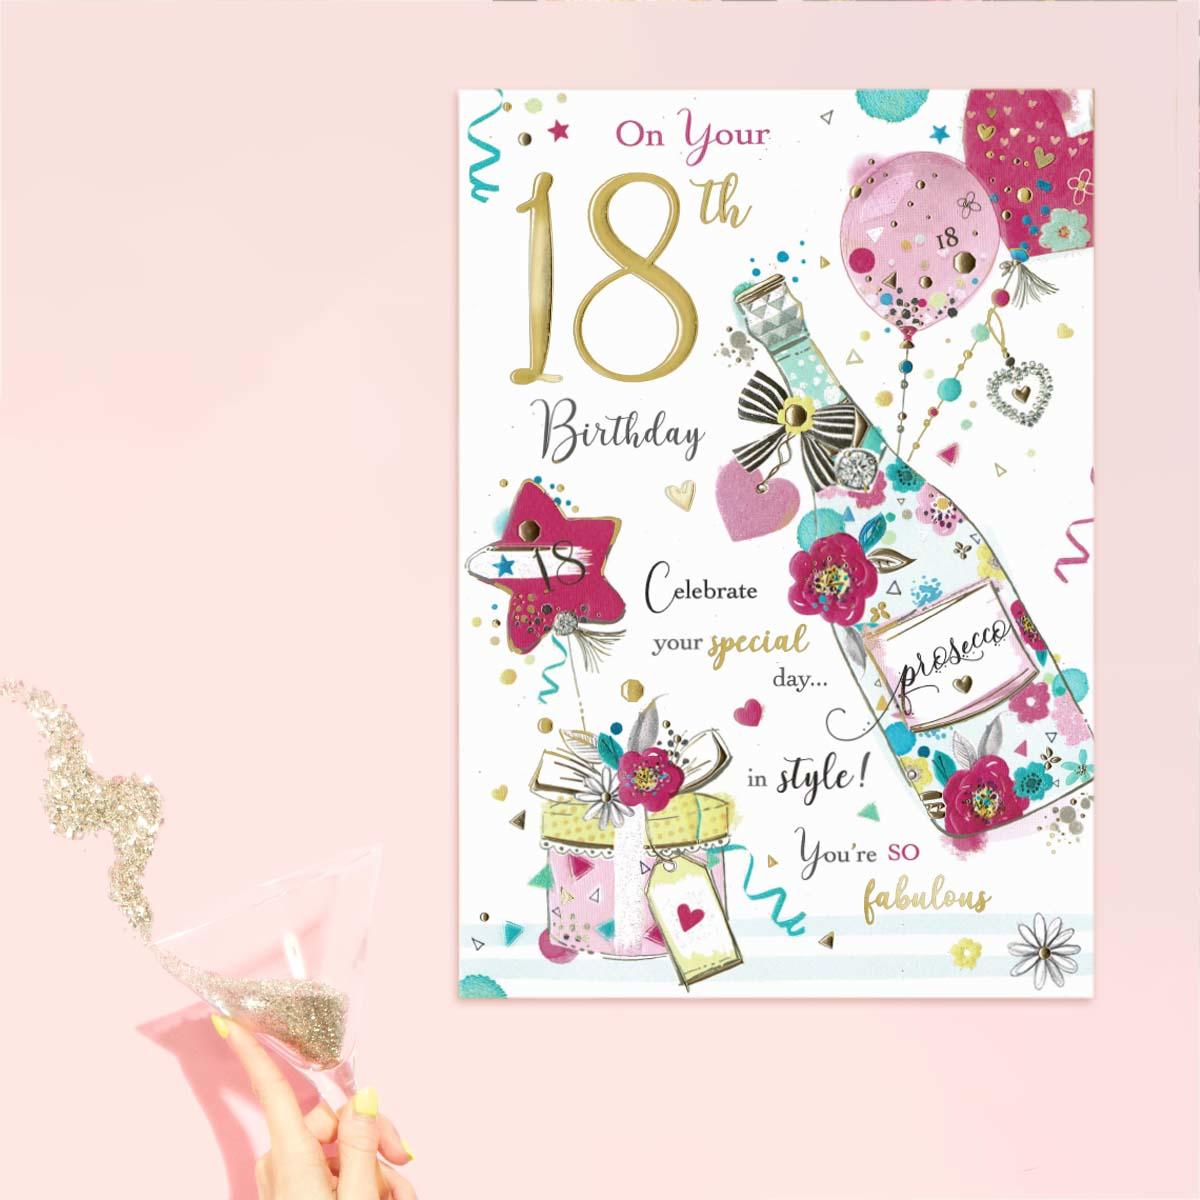 On Your 21st Birthday Prosecco Card Front Image